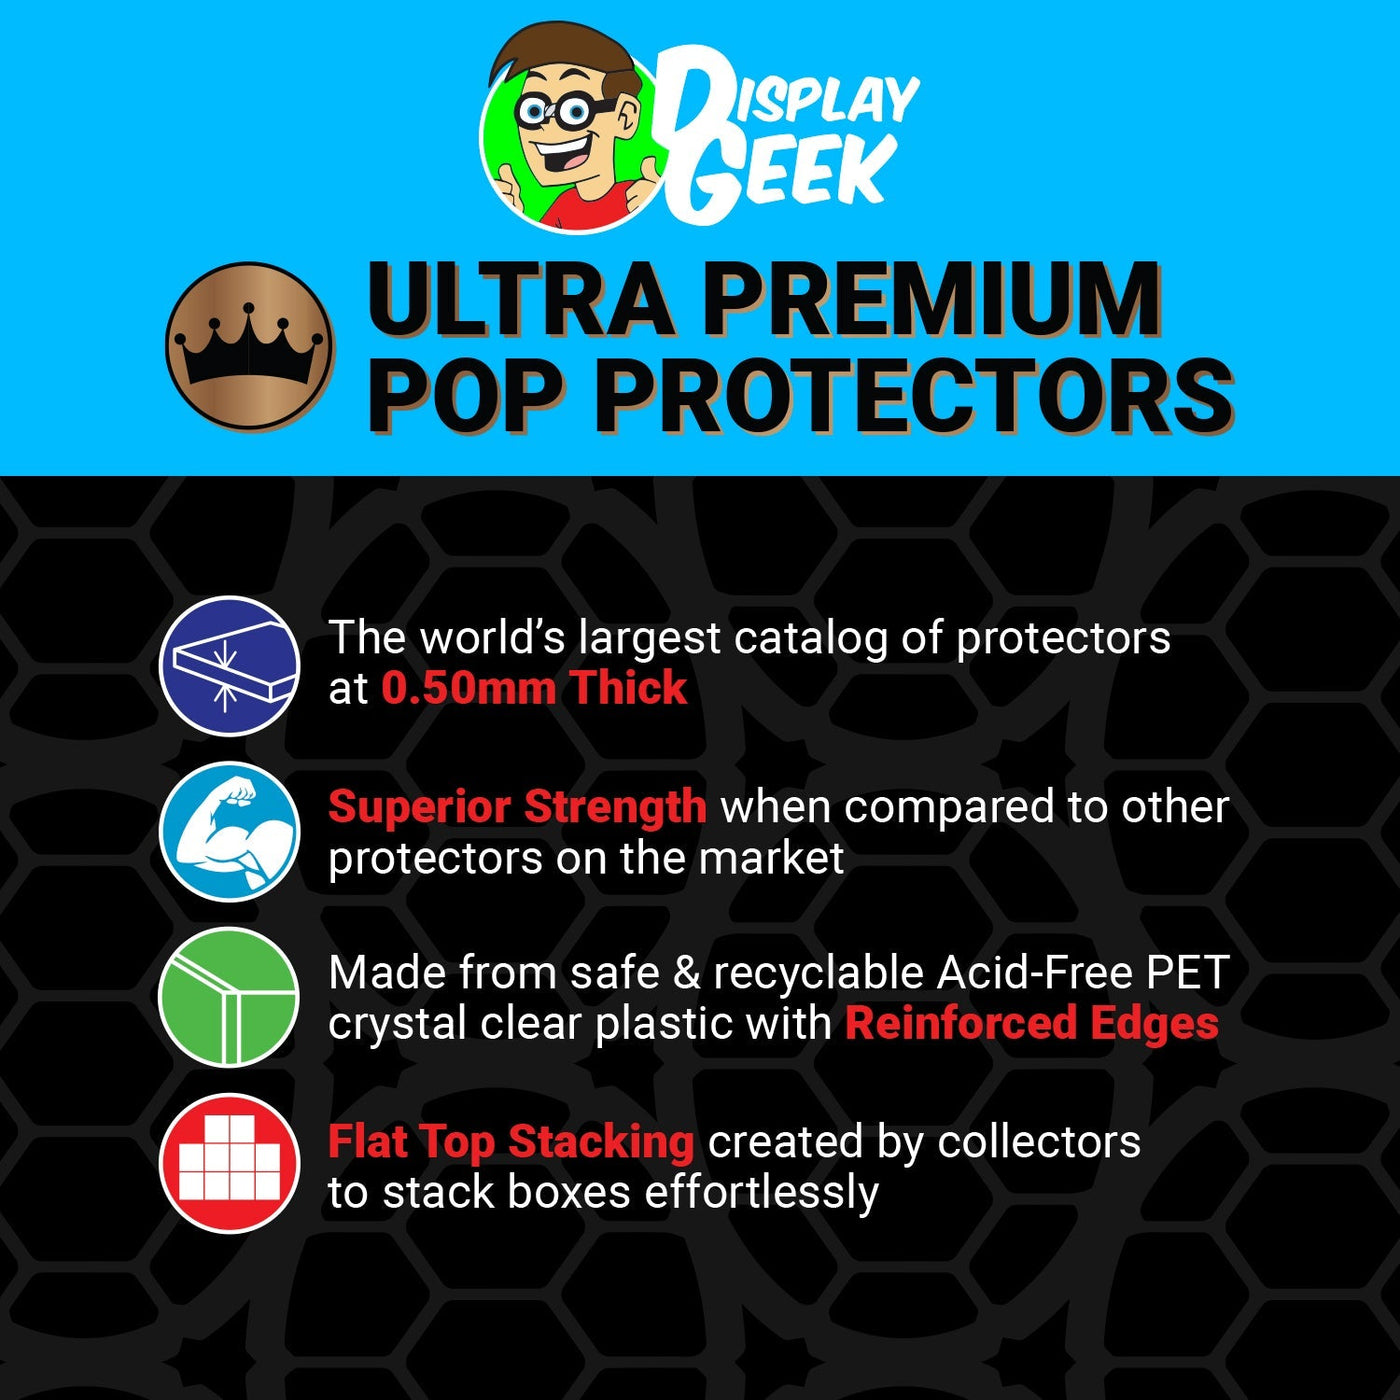 Pop Protector for 9 inch Giant Mickey Mouse Black & White SDCC Funko Pop on The Protector Guide App by Display Geek